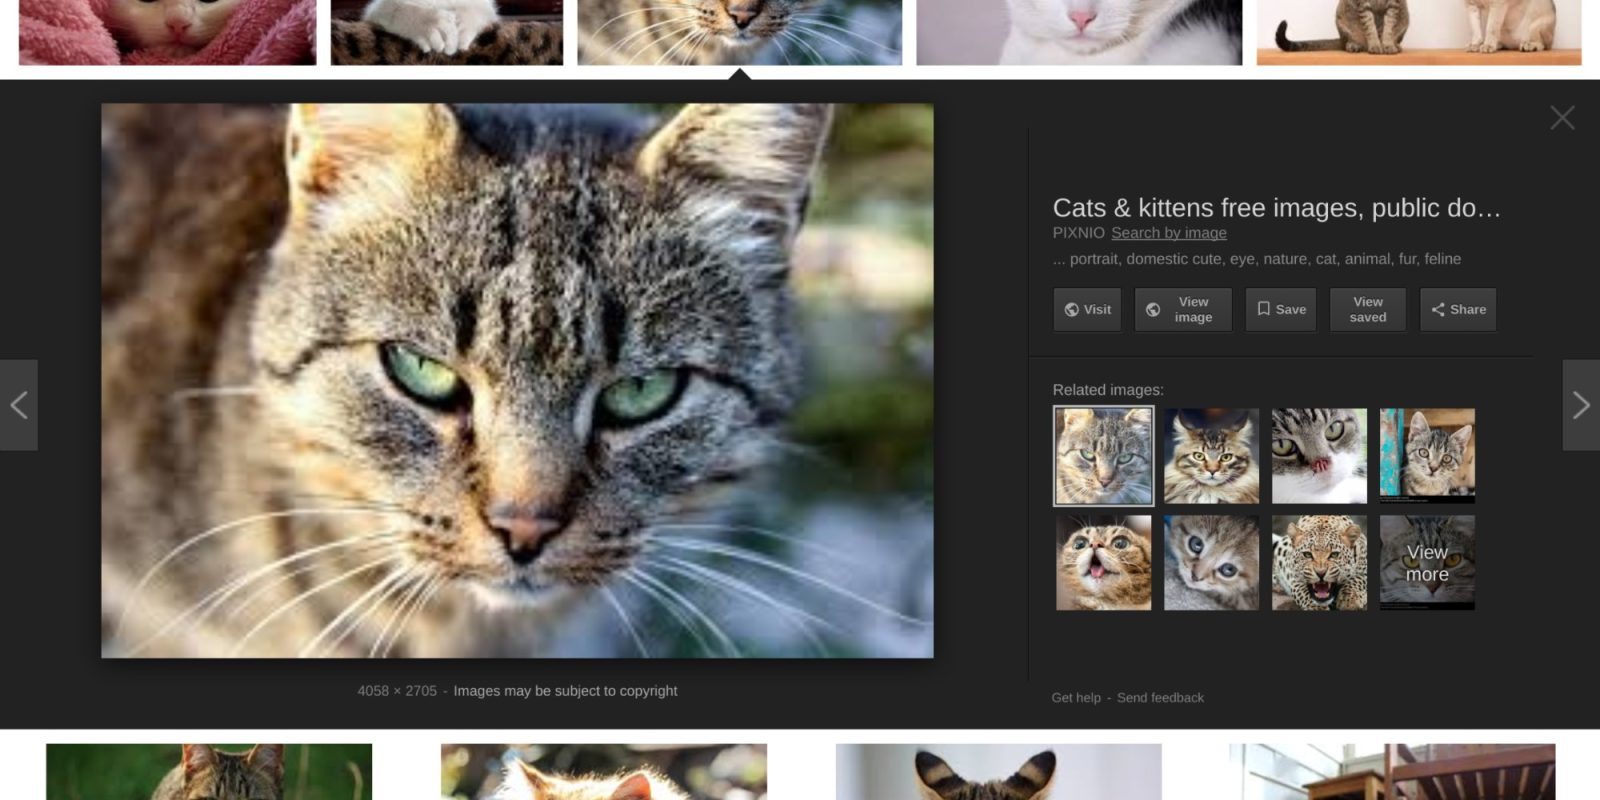 Cats Google Image search